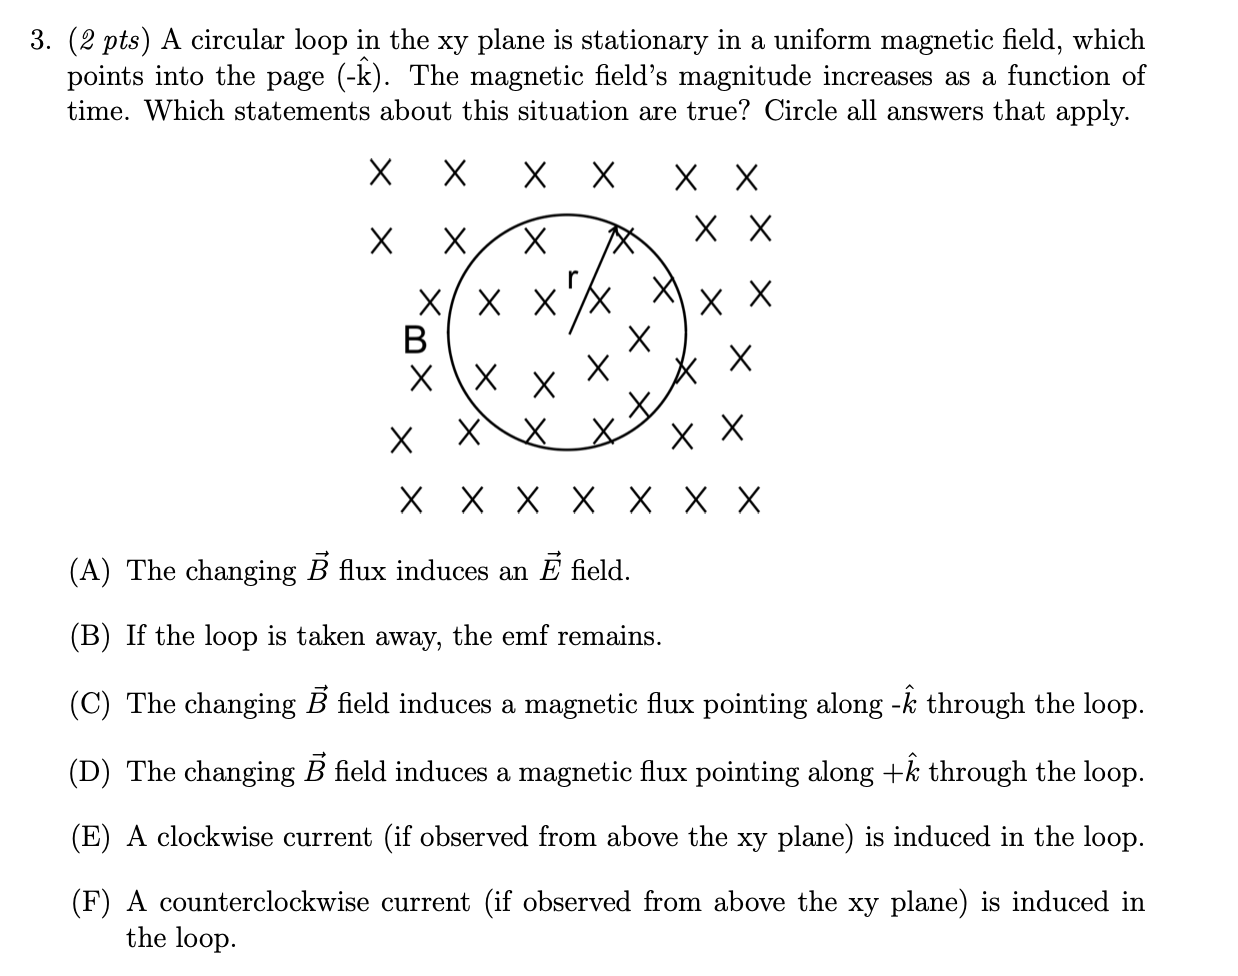 3. (2 pts) A circular loop in the xy plane is stationary in a uniform magnetic field, which
points into the page (-k). The magnetic field's magnitude increases as a function of
time. Which statements about this situation are true? Circle all answers that apply.
х
хх
хх
хх
хх
B
х
X \X
хх
хххх хXх
(A) The changing B flux induces an E field.
(B) If the loop is taken away, the emf remains.
(C) The changing B field induces a magnetic flux pointing along -k through the loop.
(D) The changing B field induces a magnetic flux pointing along +k through the loop.
(E) A clockwise current (if observed from above the xy plane) is induced in the loop.
(F) A counterclockwise current (if observed from above the xy plane) is induced in
the loop.
